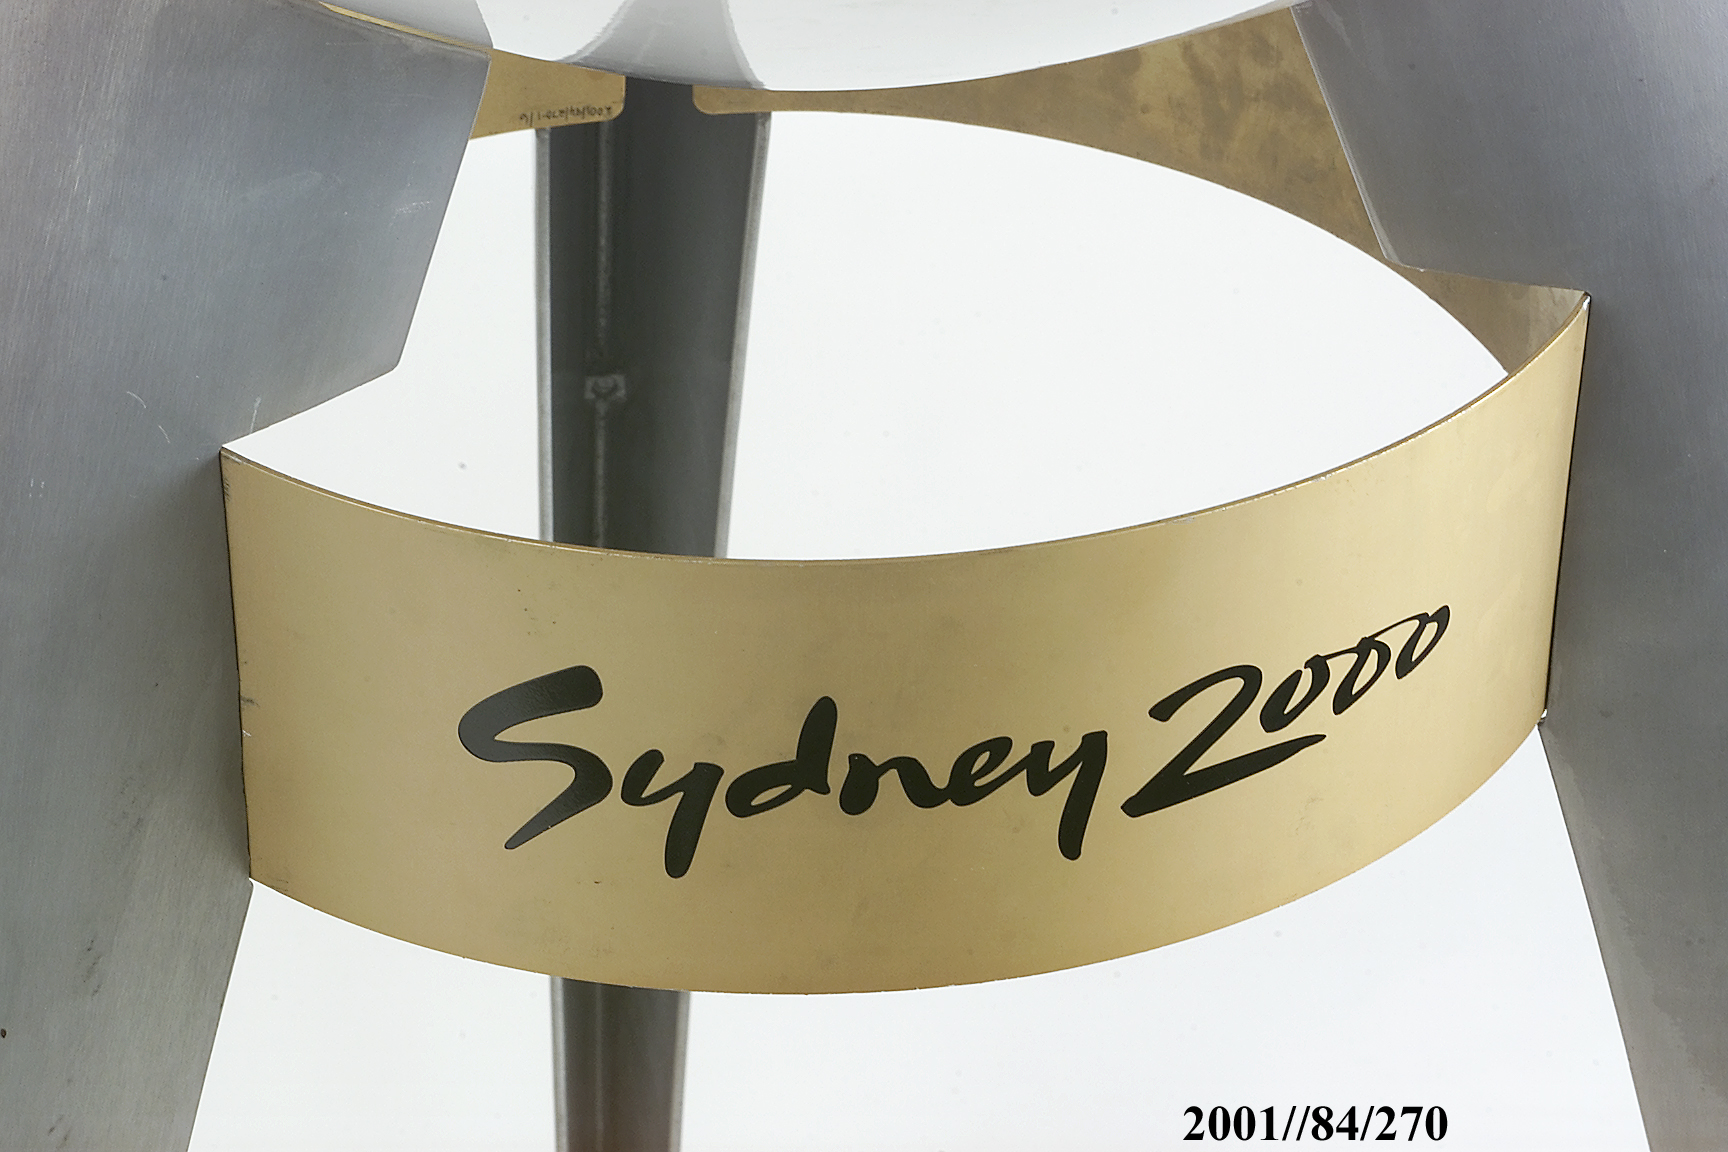 Portable cauldron for the Sydney Olympic and Paralympic torch relays